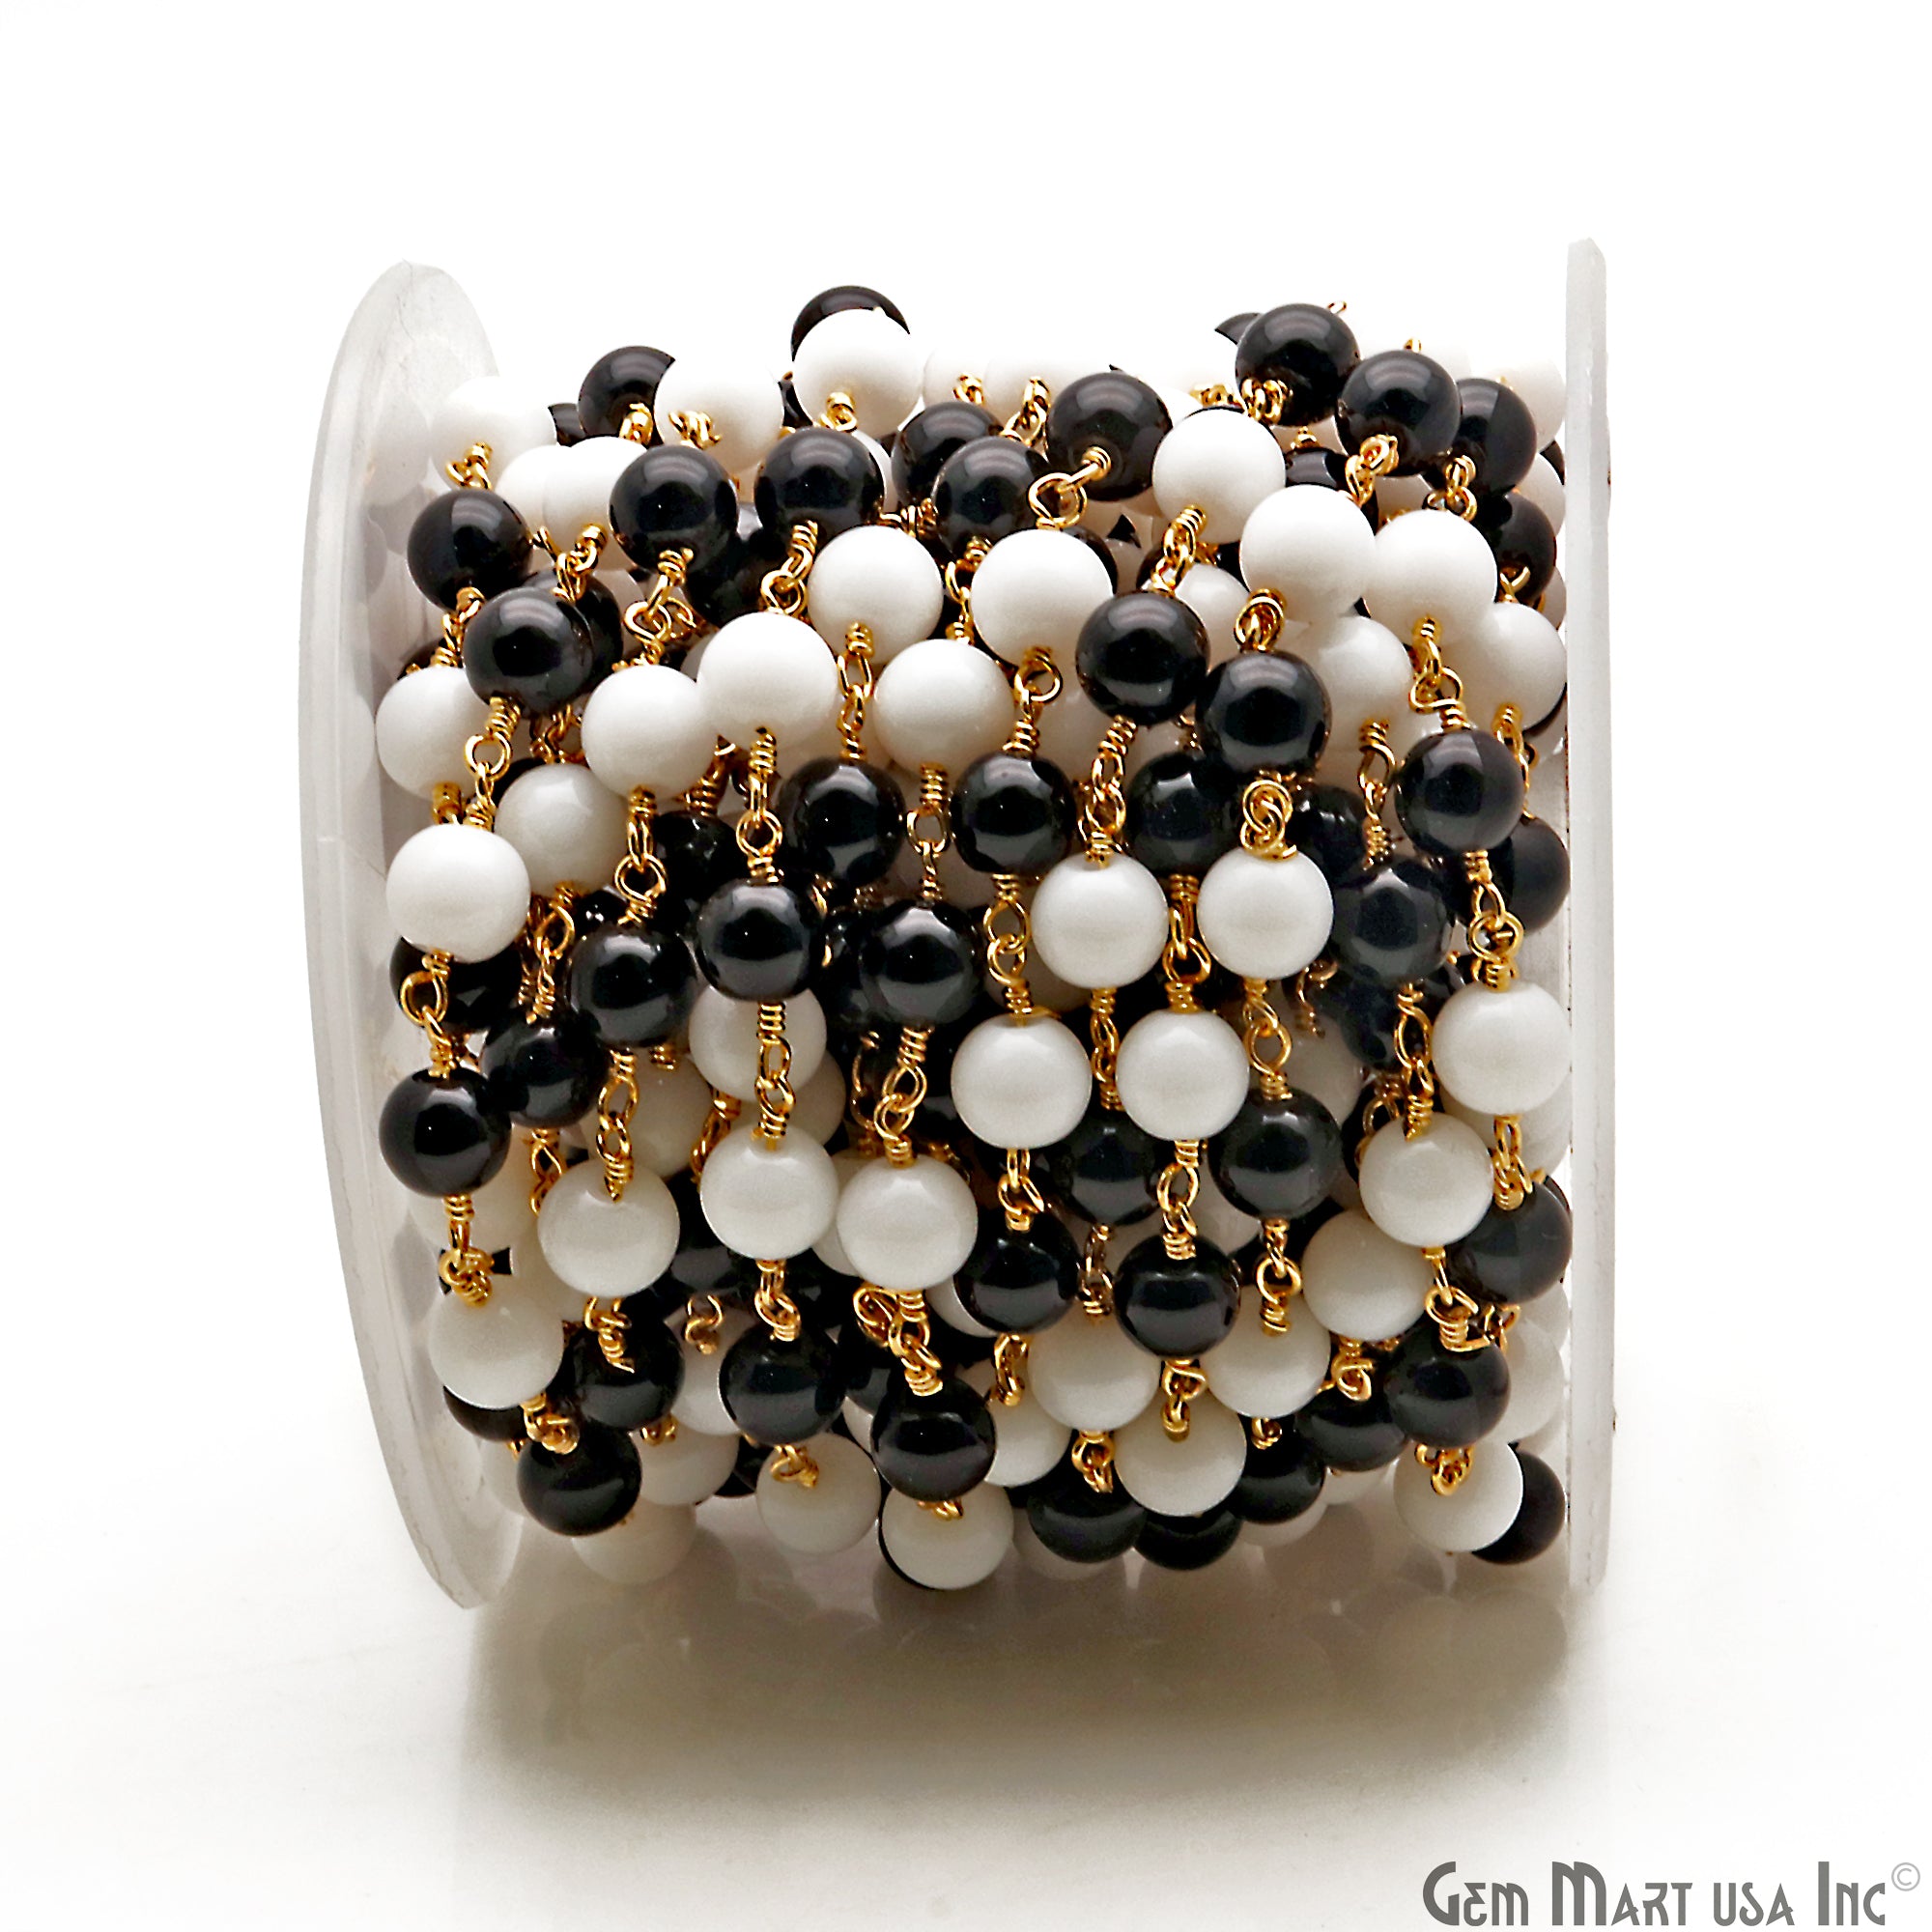 Black Spinel & White Agate Cabochon Beads 6mm Gold Wire Wrapped Rosary Chain - GemMartUSA